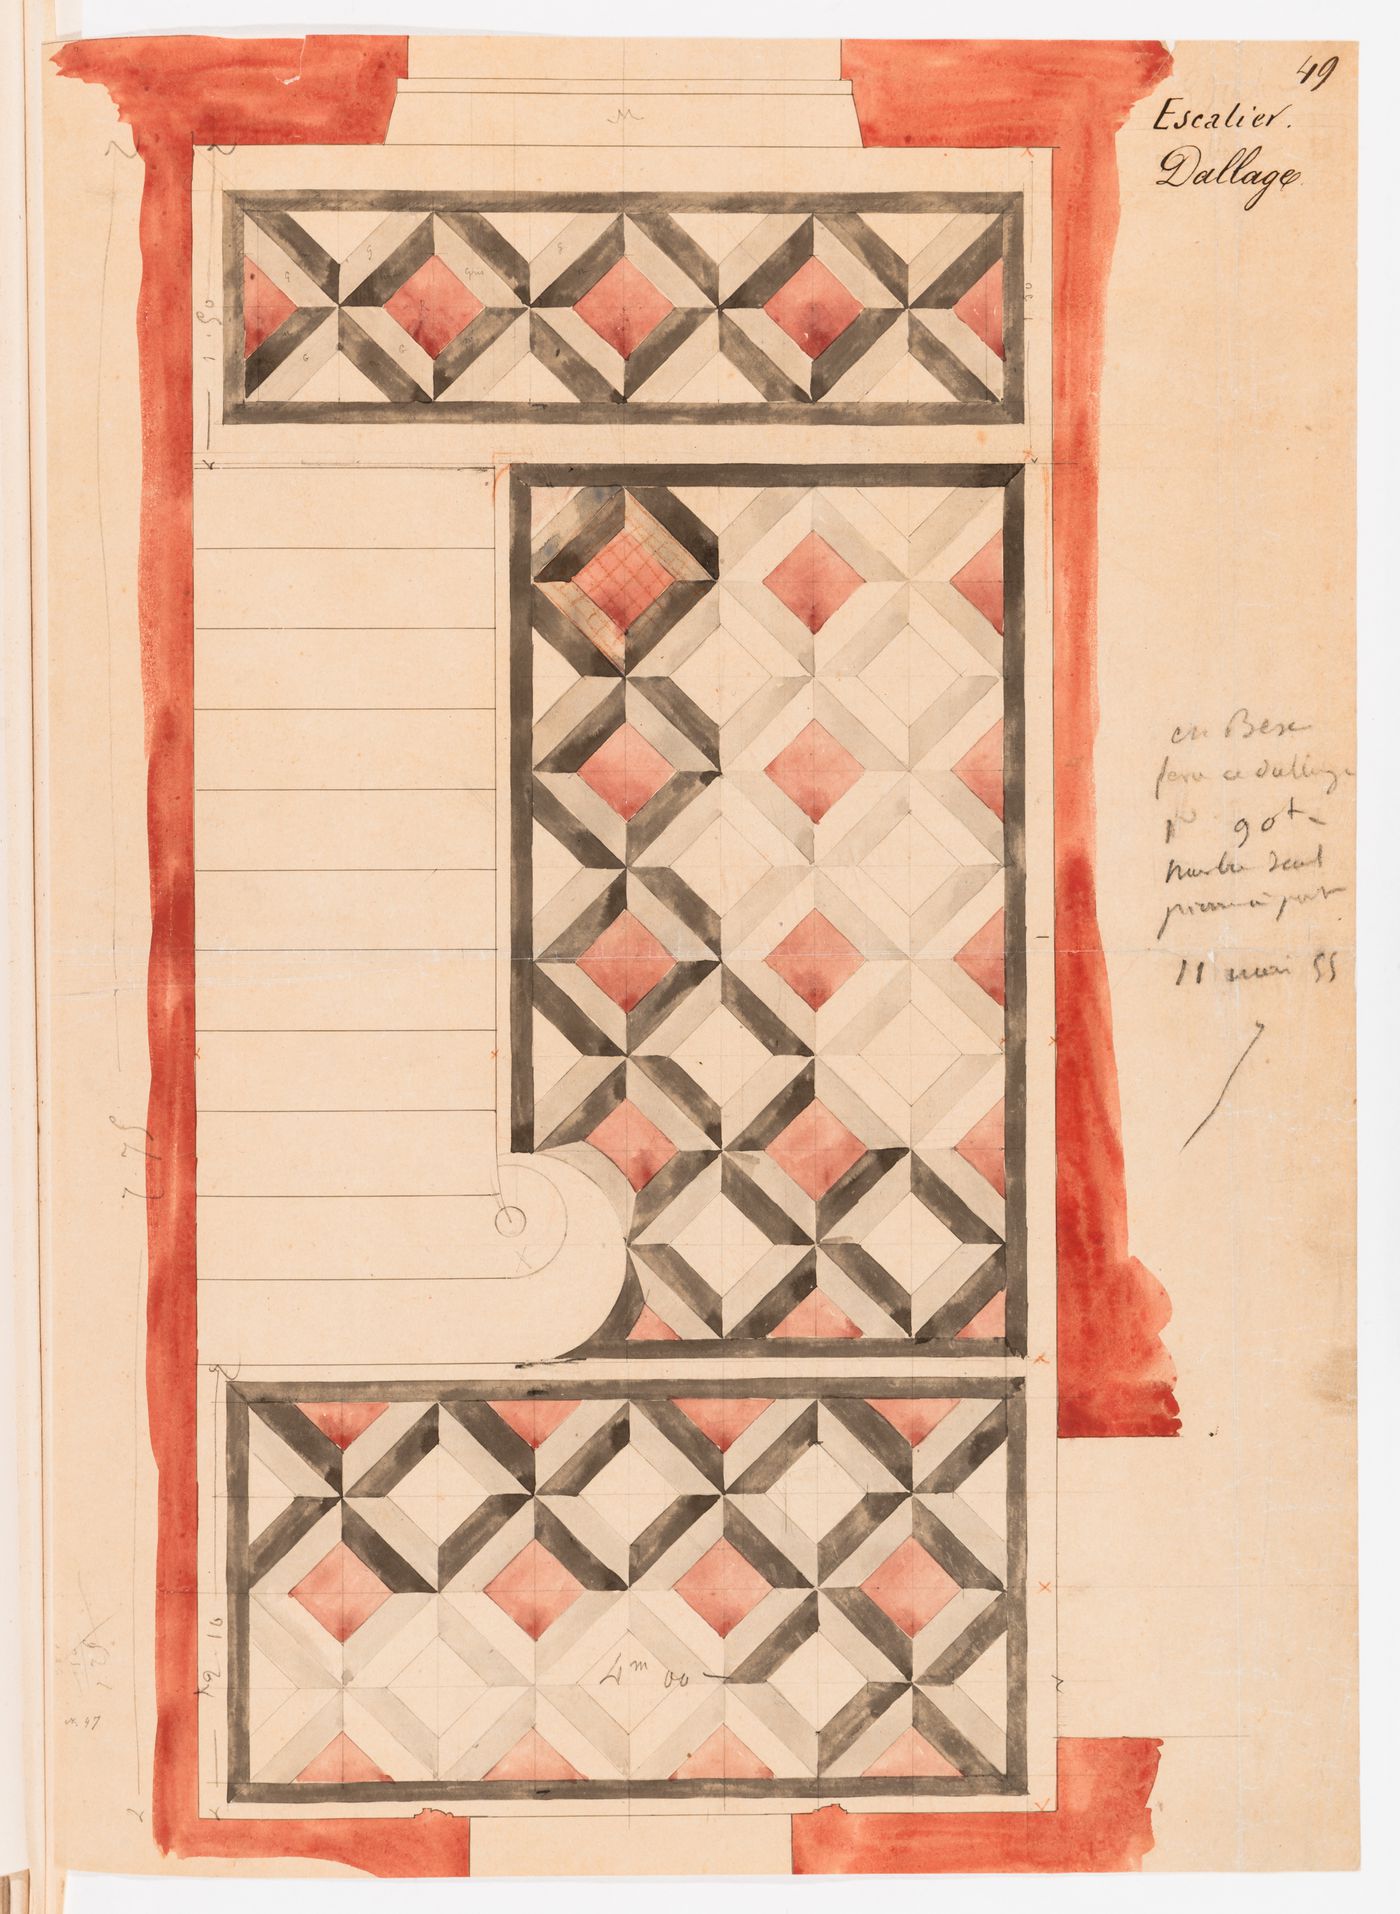 Plan for the floor tile pattern for the grand staircase, Hôtel Soltykoff